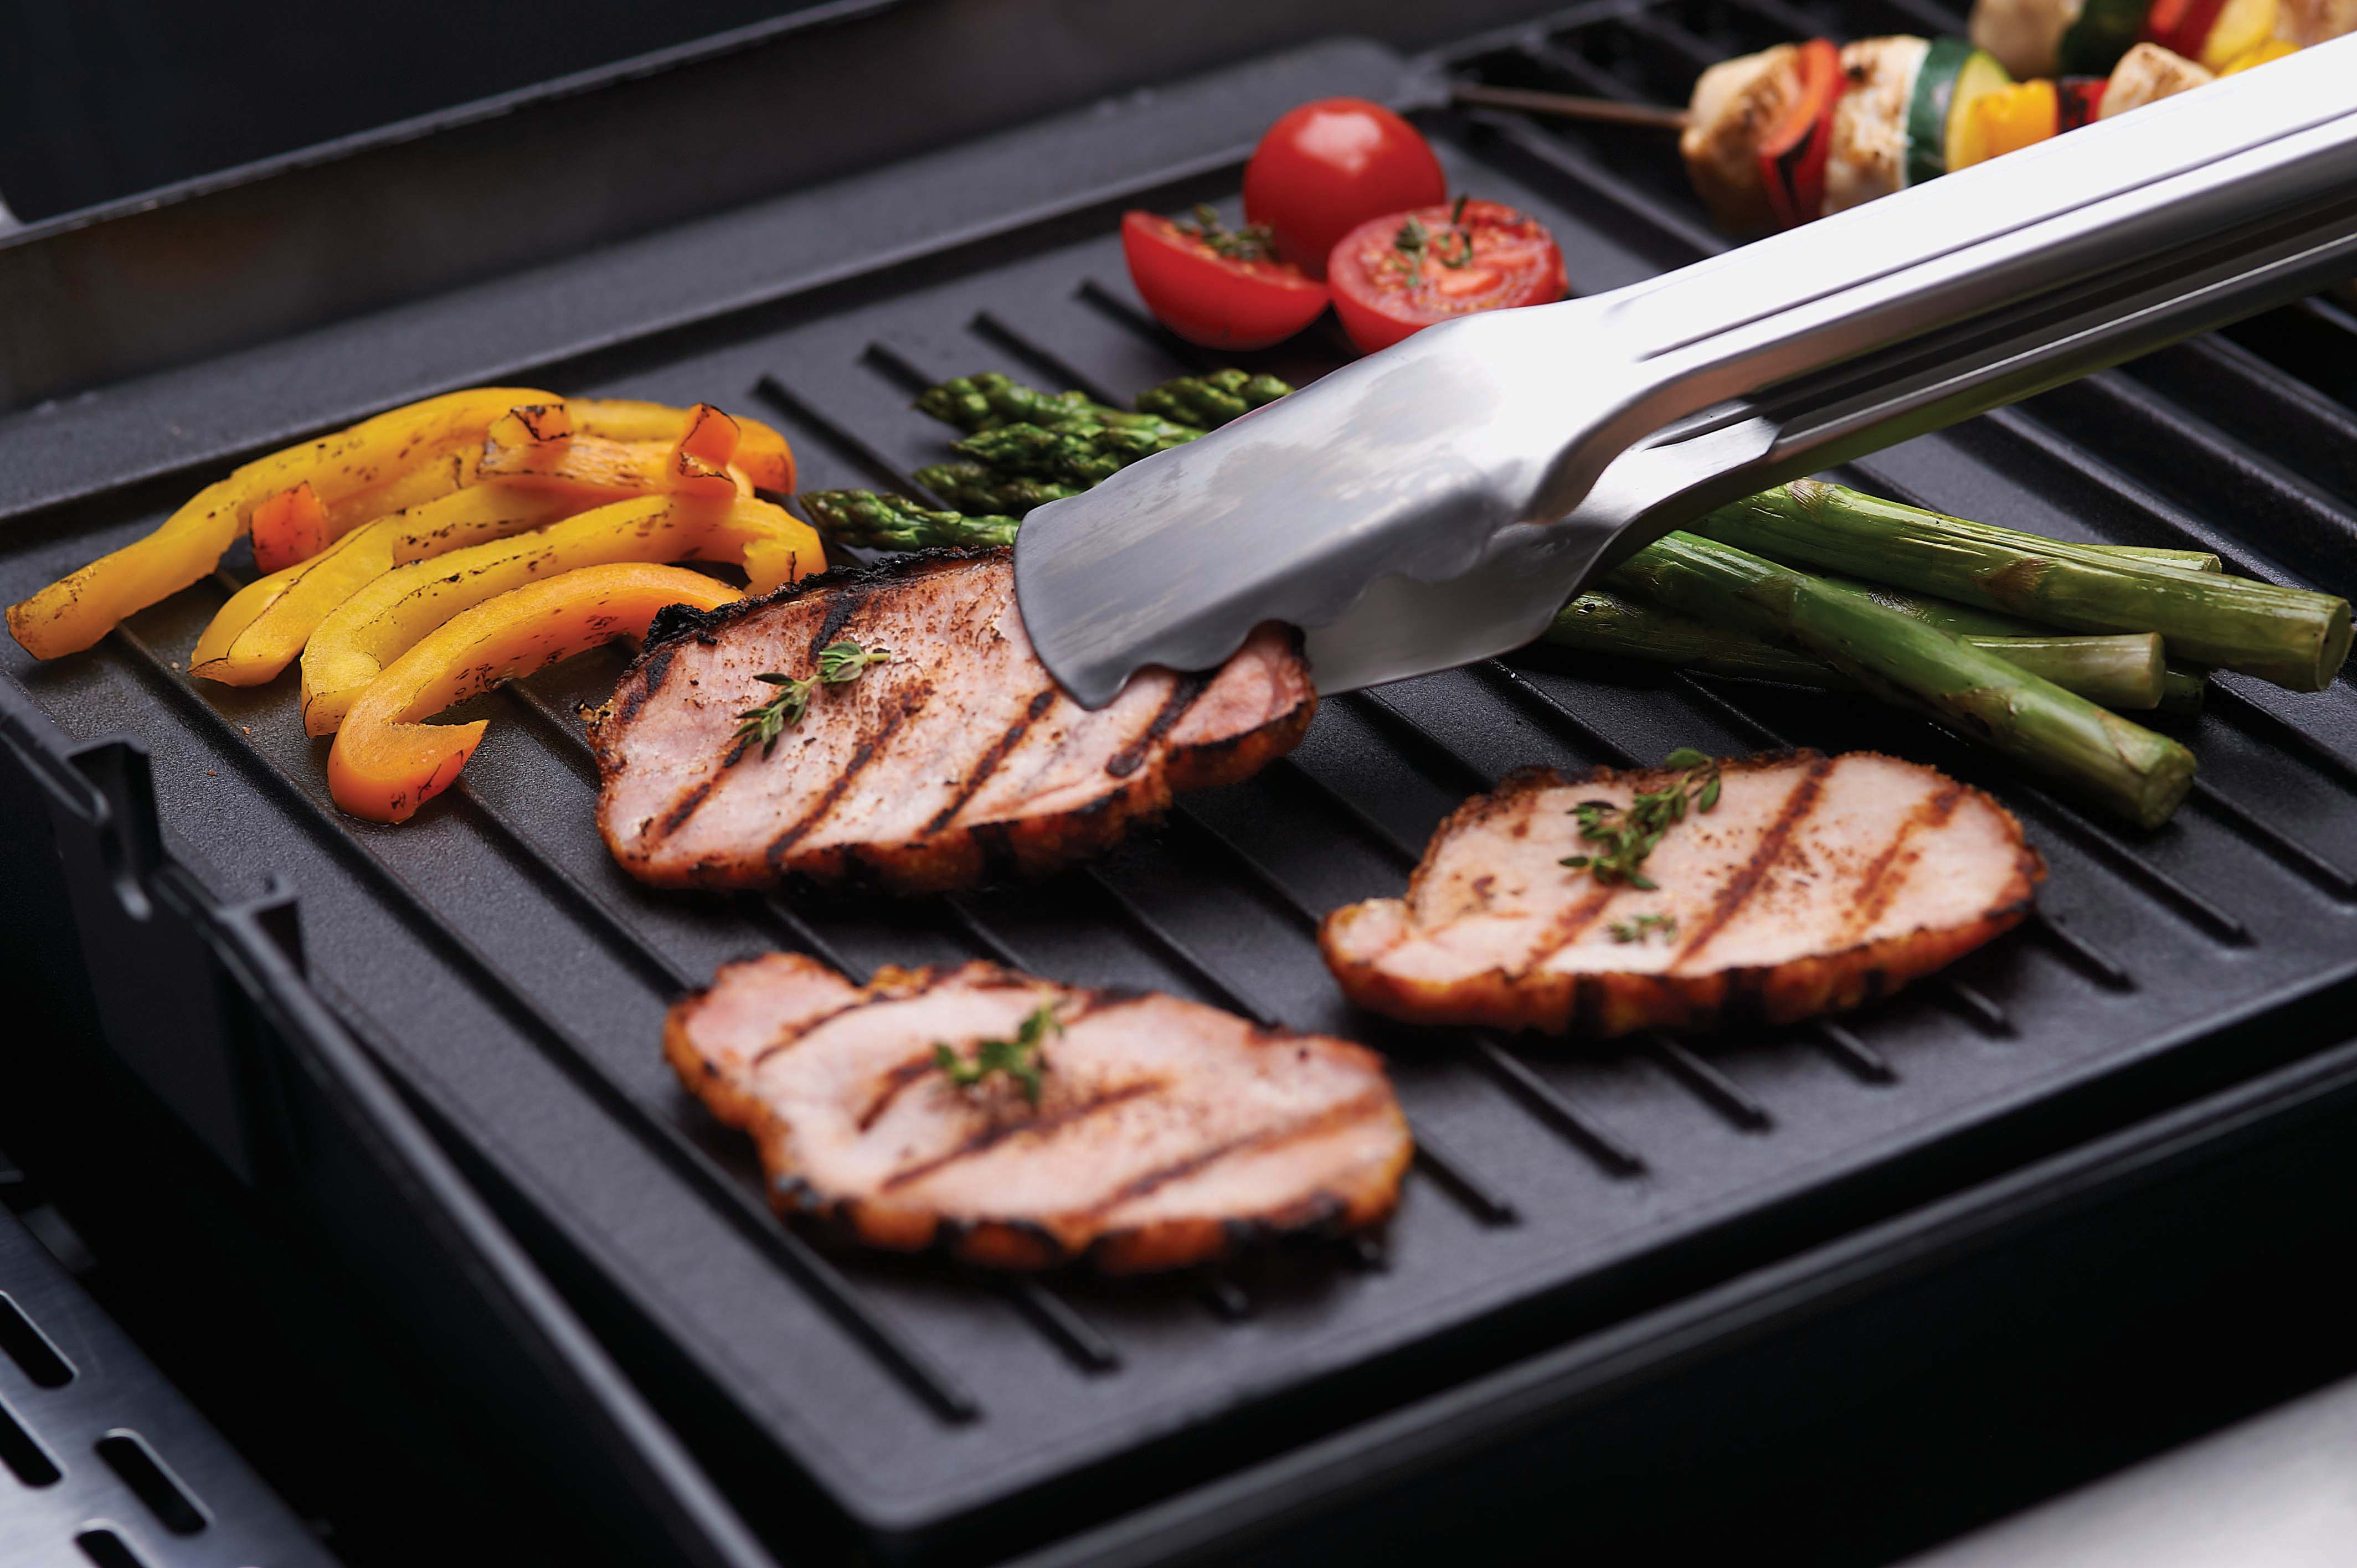 Broil King Cast Iron Griddle